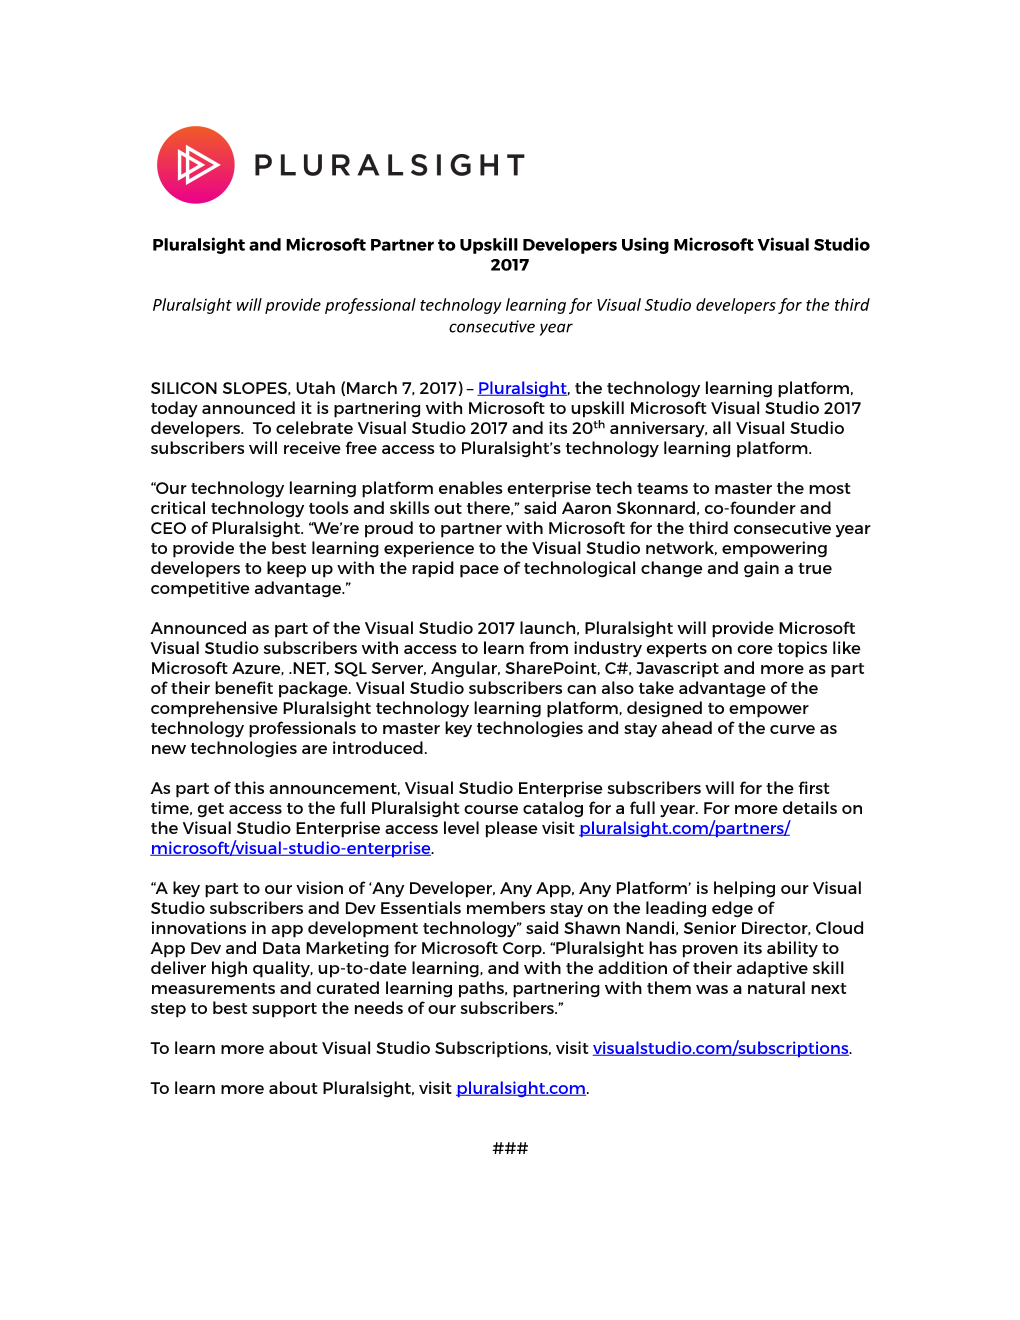 Pluralsight Will Provide Professional Technology Learning for Visual Studio Developers for the Third Consecu8ve Year